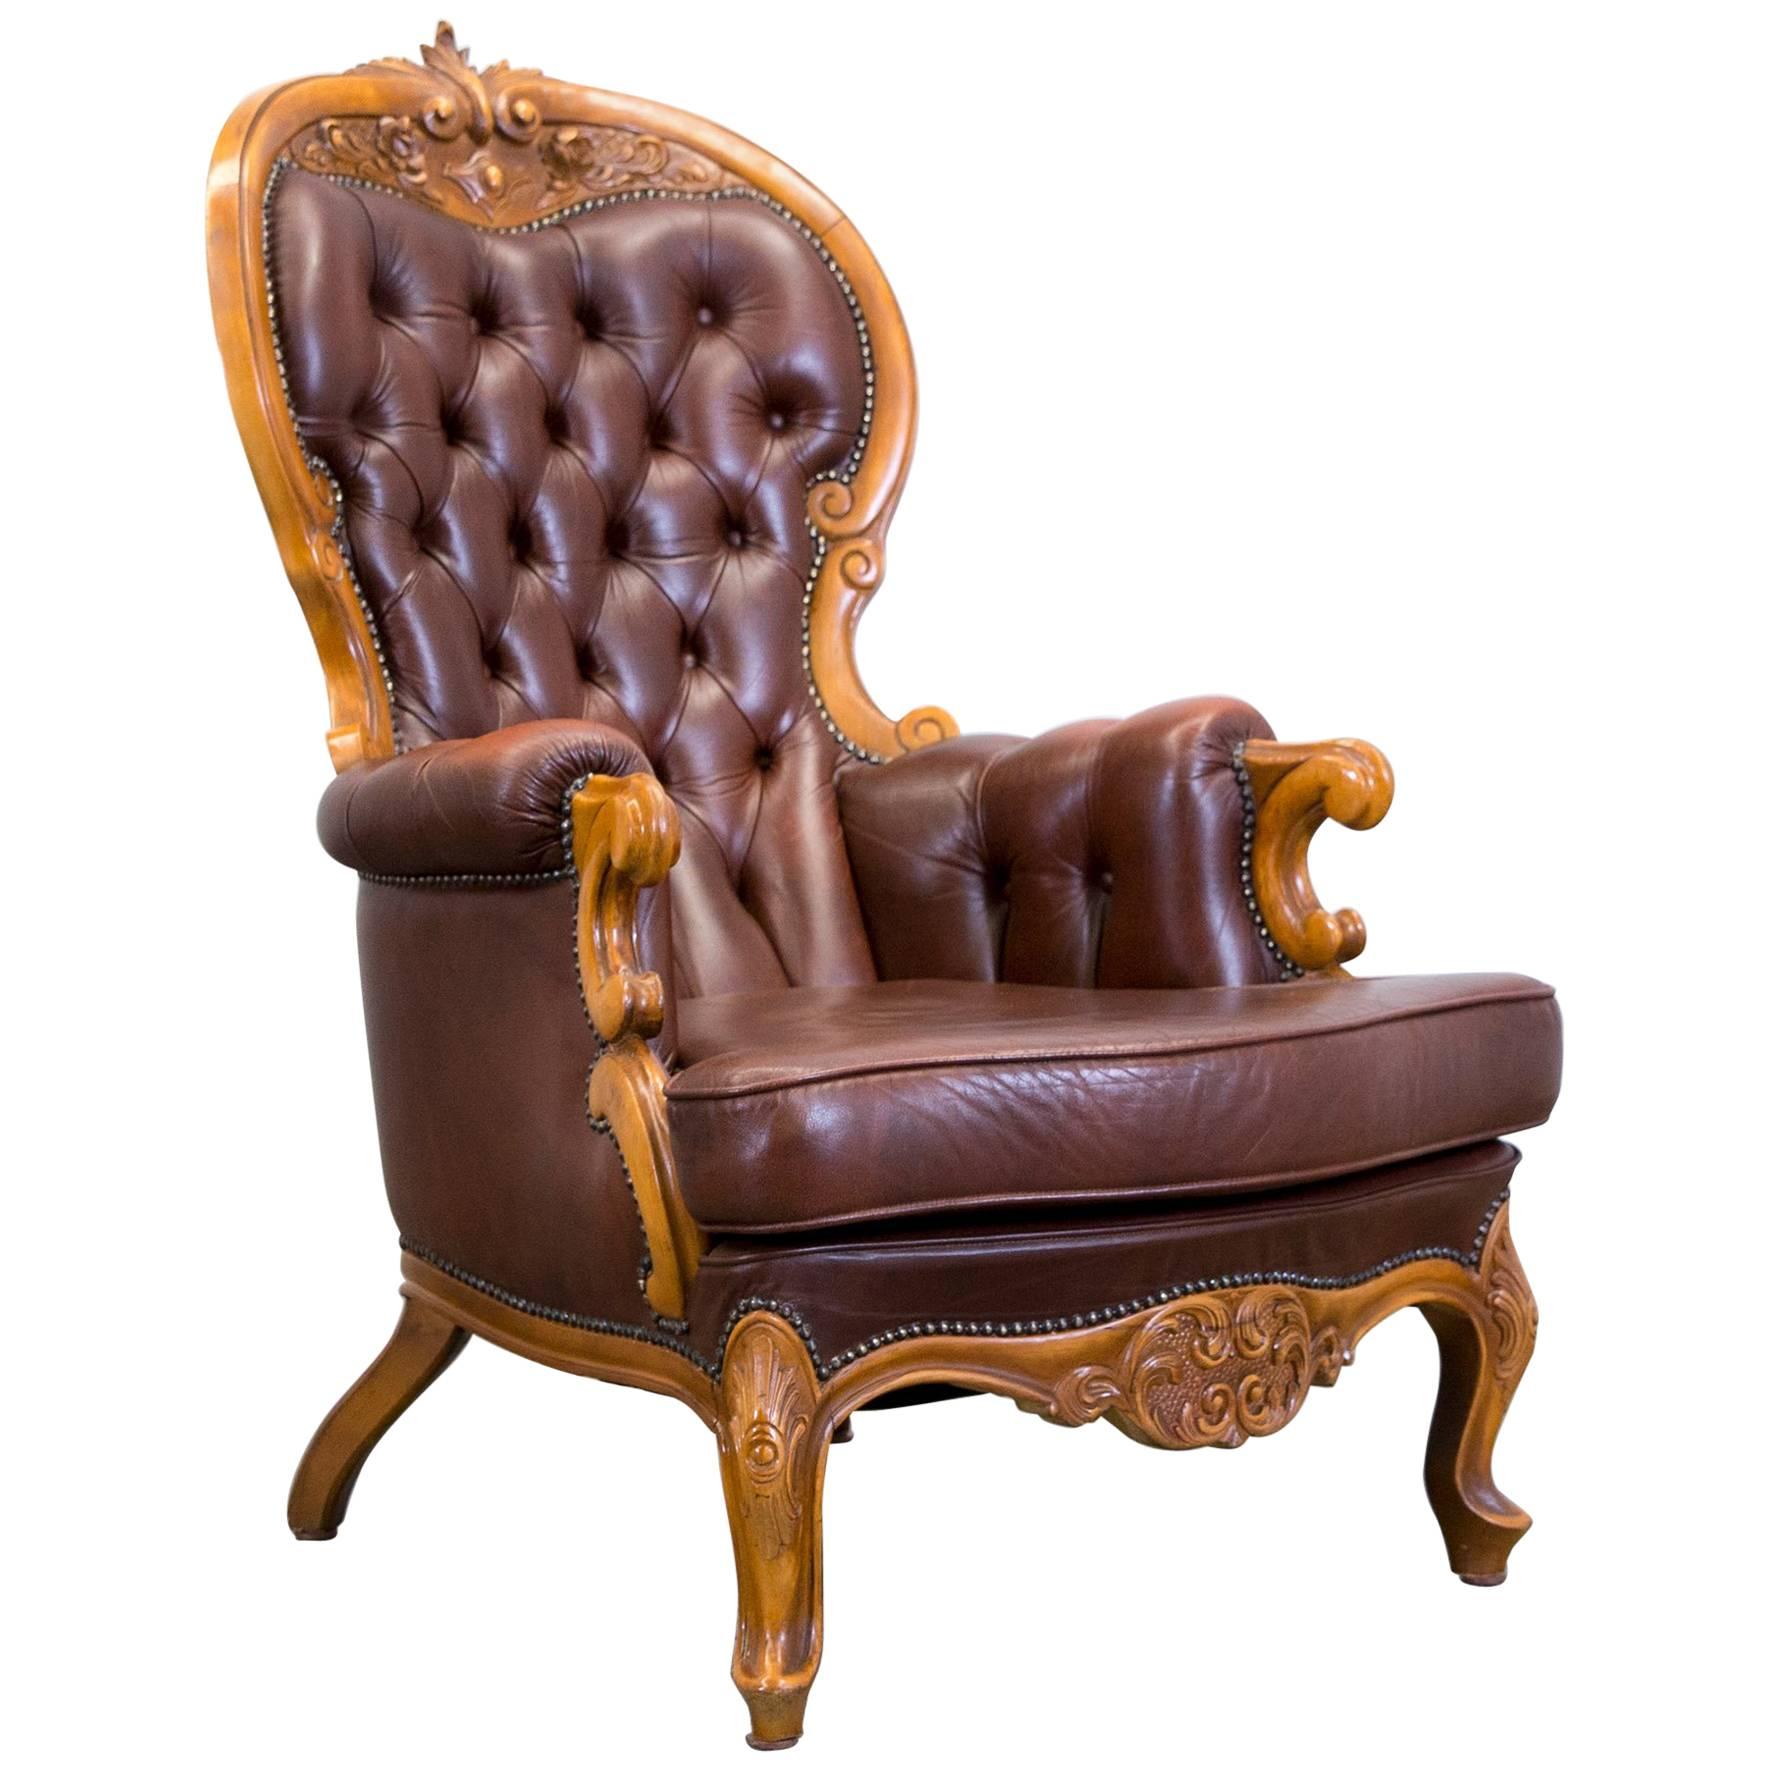 Chesterfield Brown Leather Armchair, One-Seat Wood Barock Retro For Sale